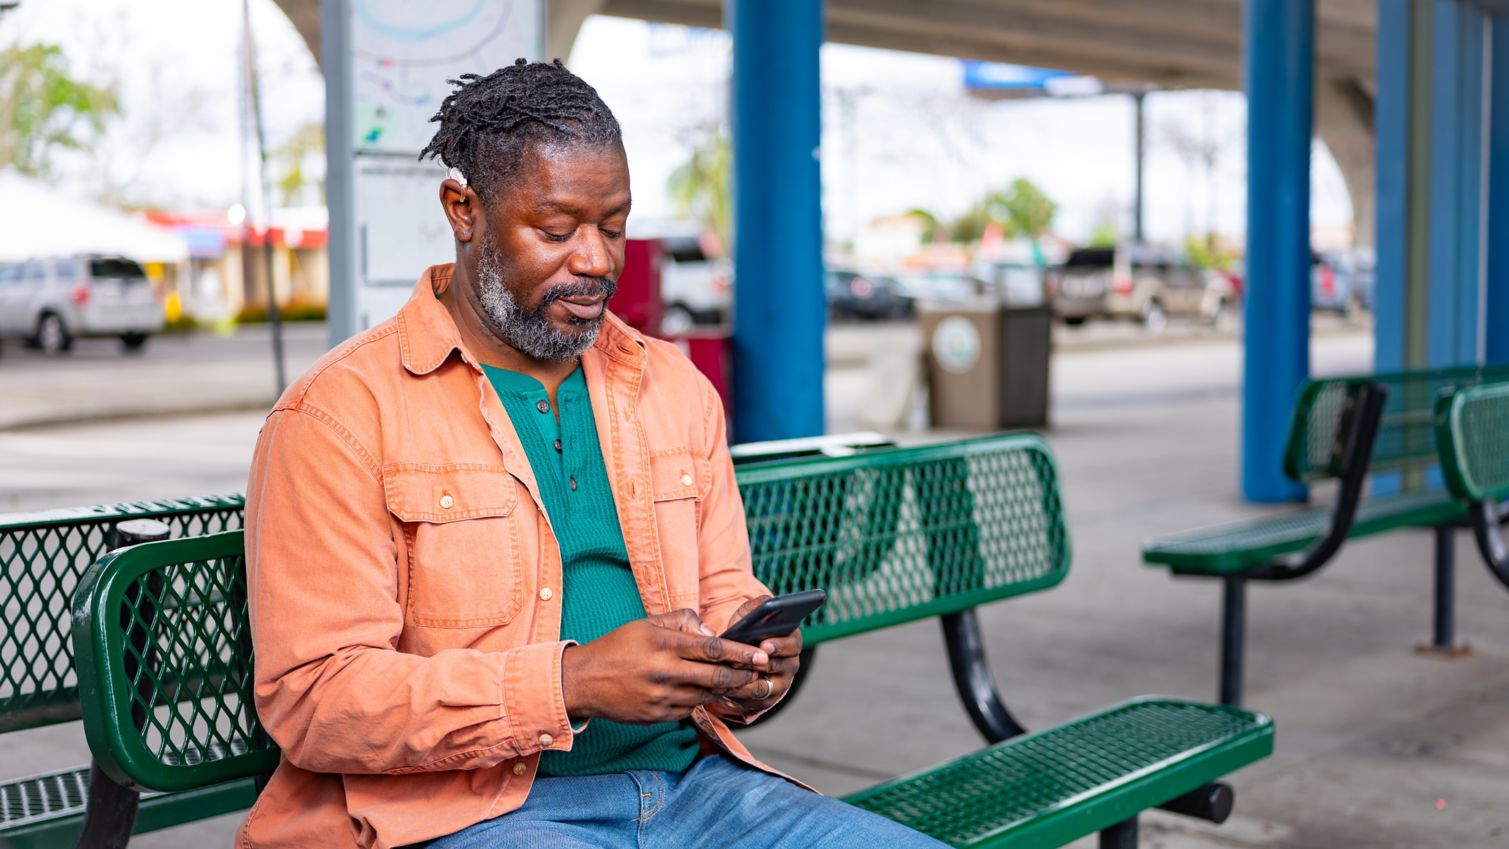 Medicaid member uses phone on city bench